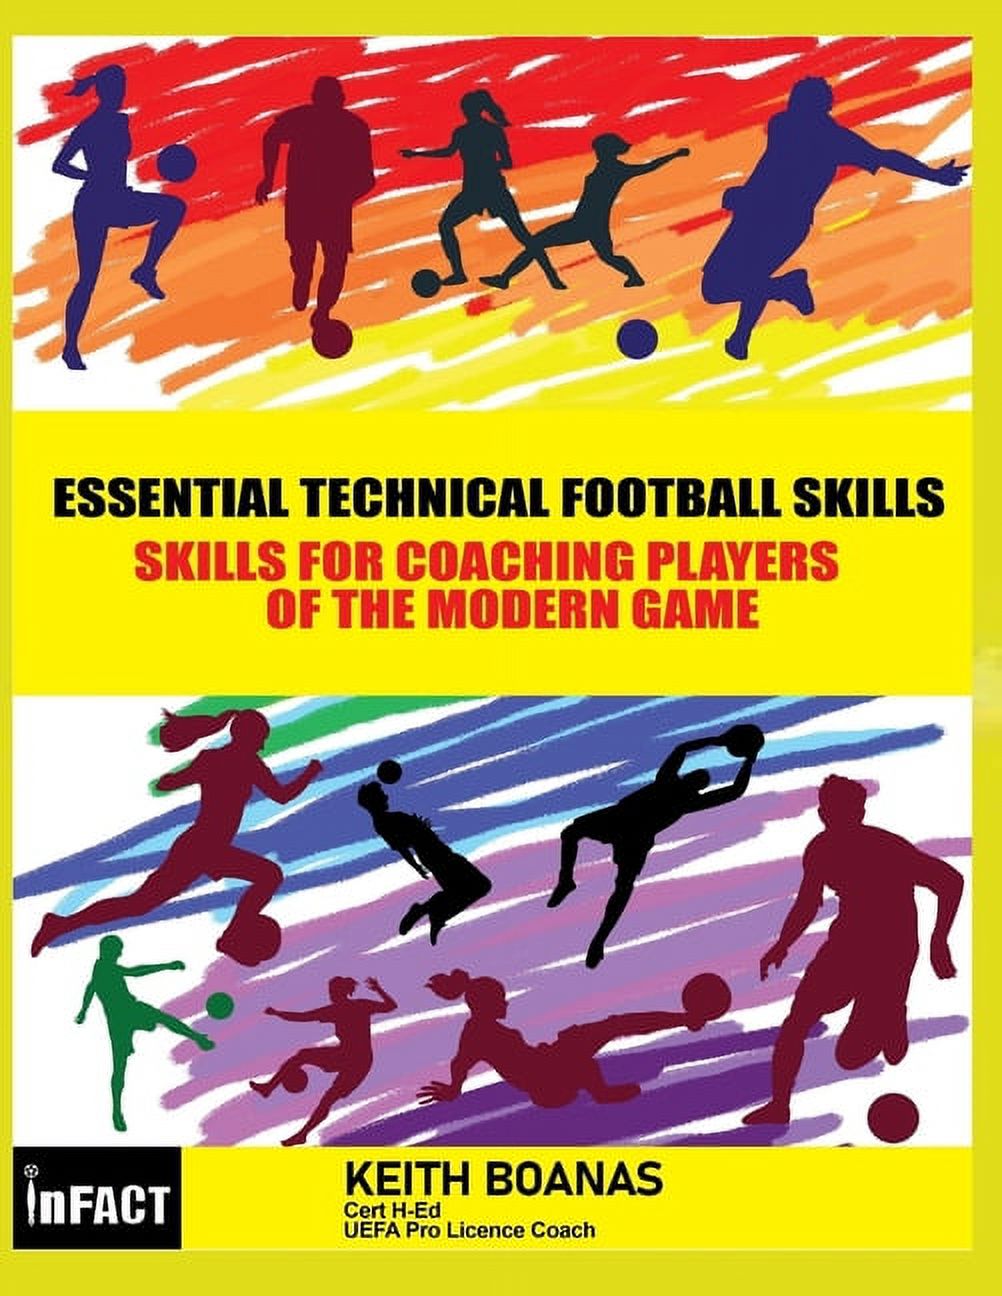 Essential Modern Day Technical Skills: Essential Technical Football Skills ( Black and White Version) : Must Have Skills For Kids & Youth Soccer - For Players Parents & Coaches to Coach in Modern Day Football (Series #1) (Paperback) - image 1 of 1